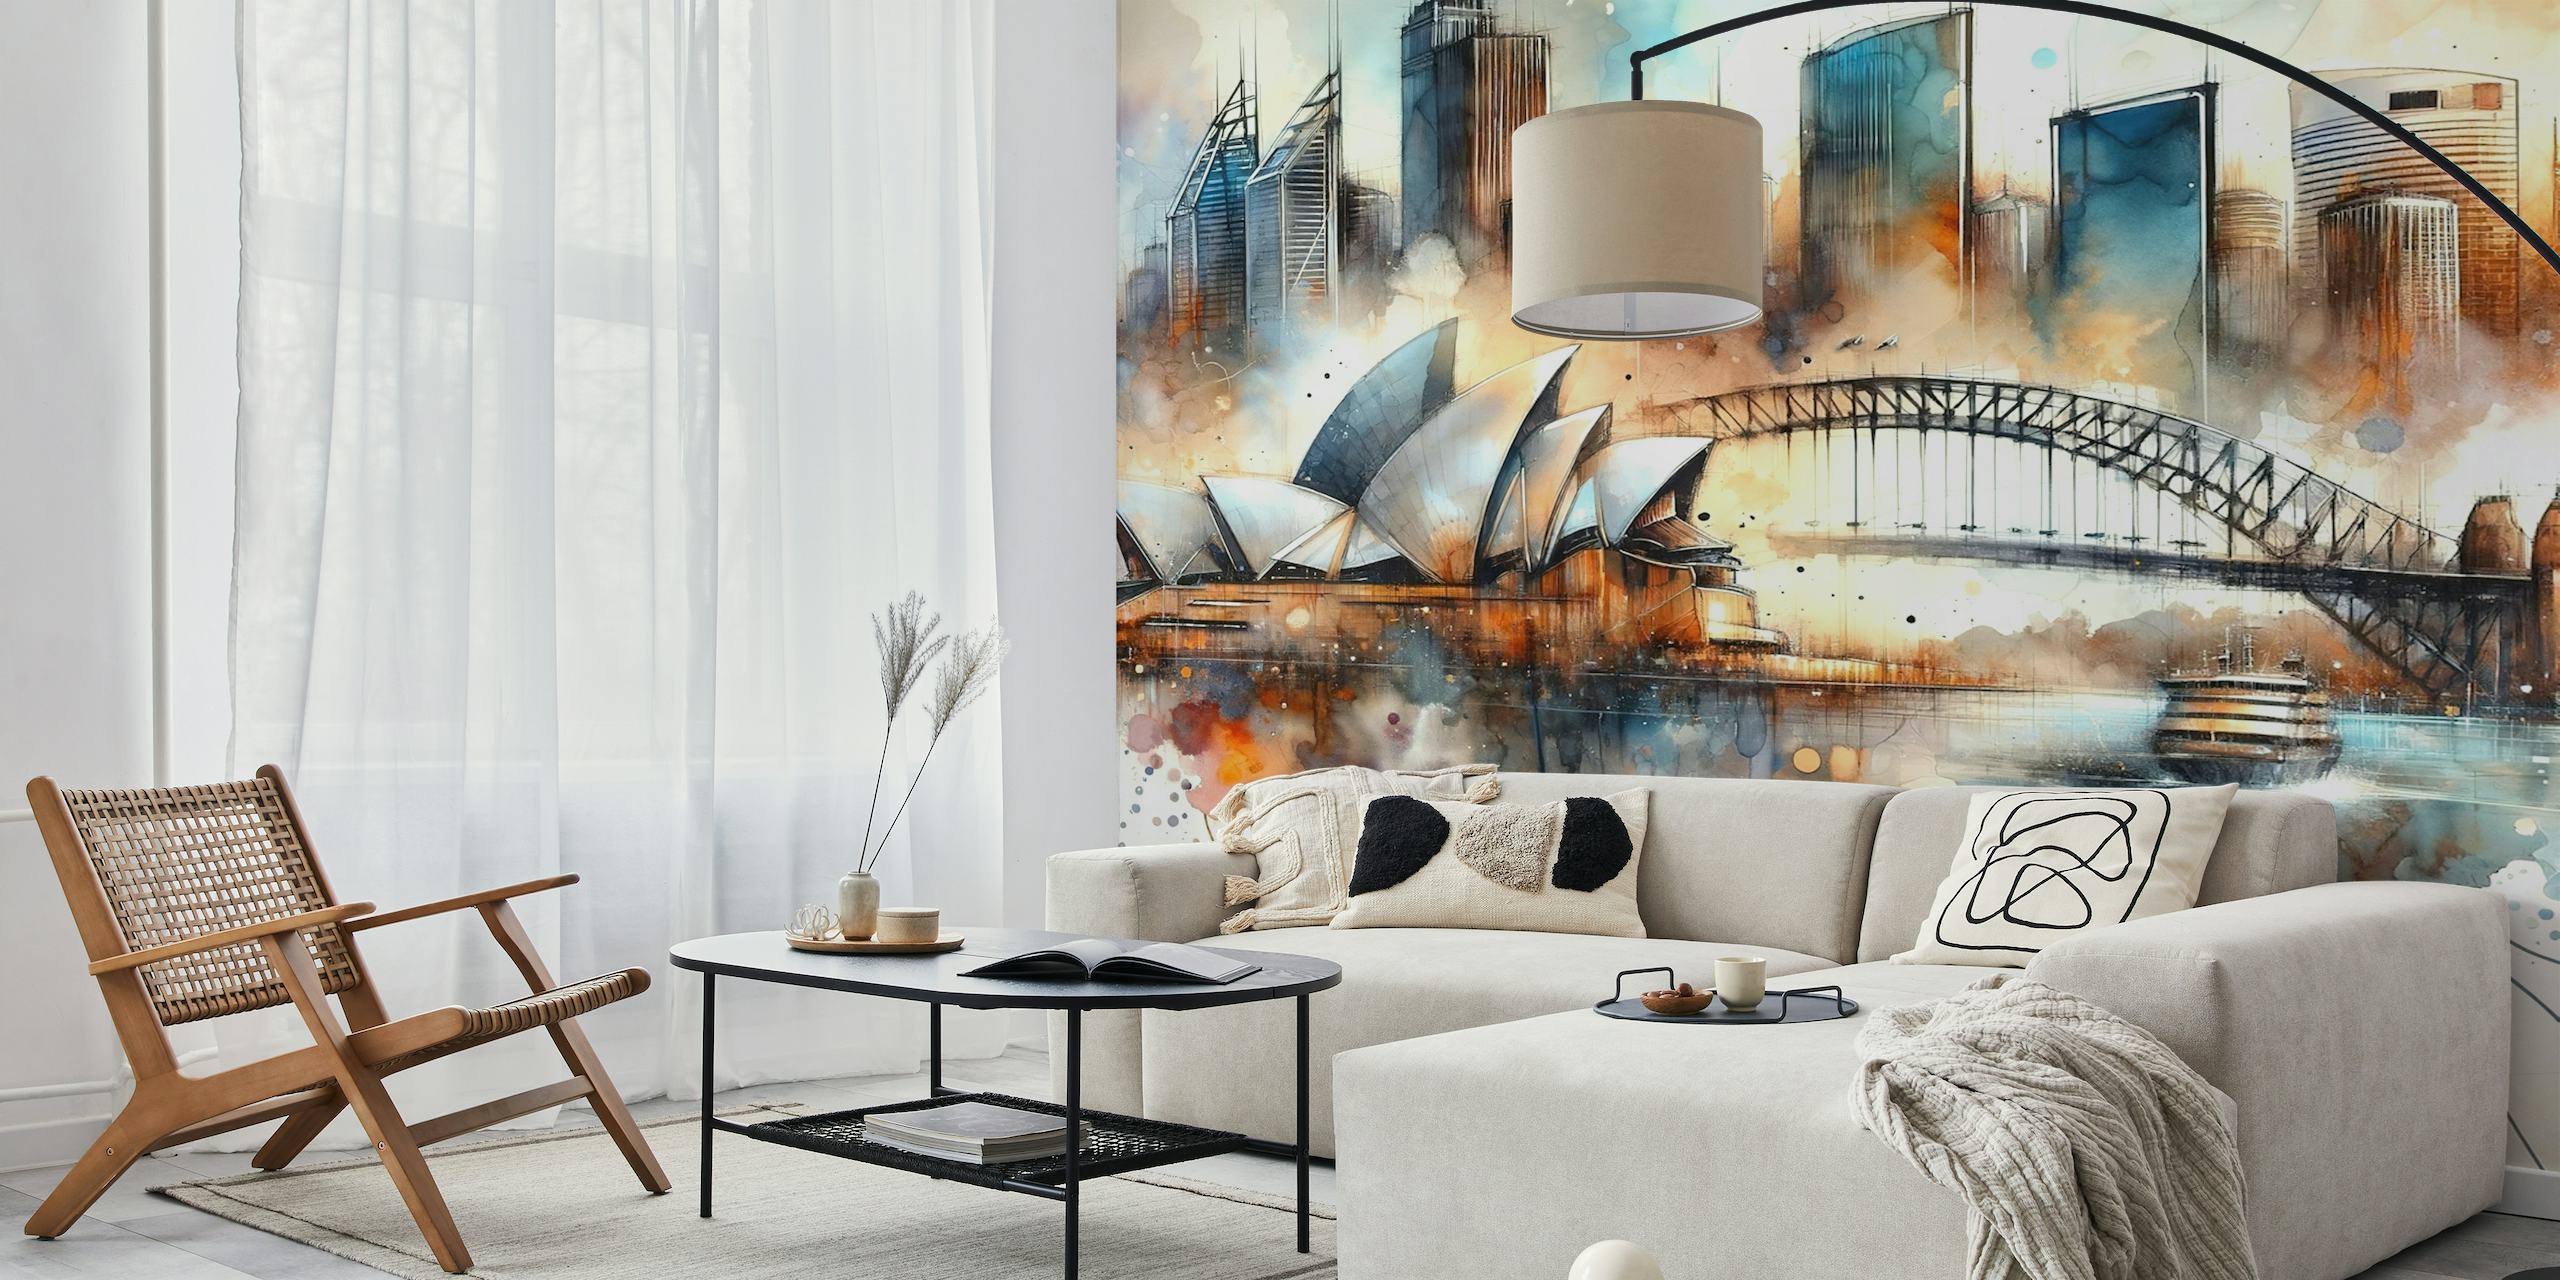 Watercolor painting of Sydney skyline with Opera House and Harbor Bridge